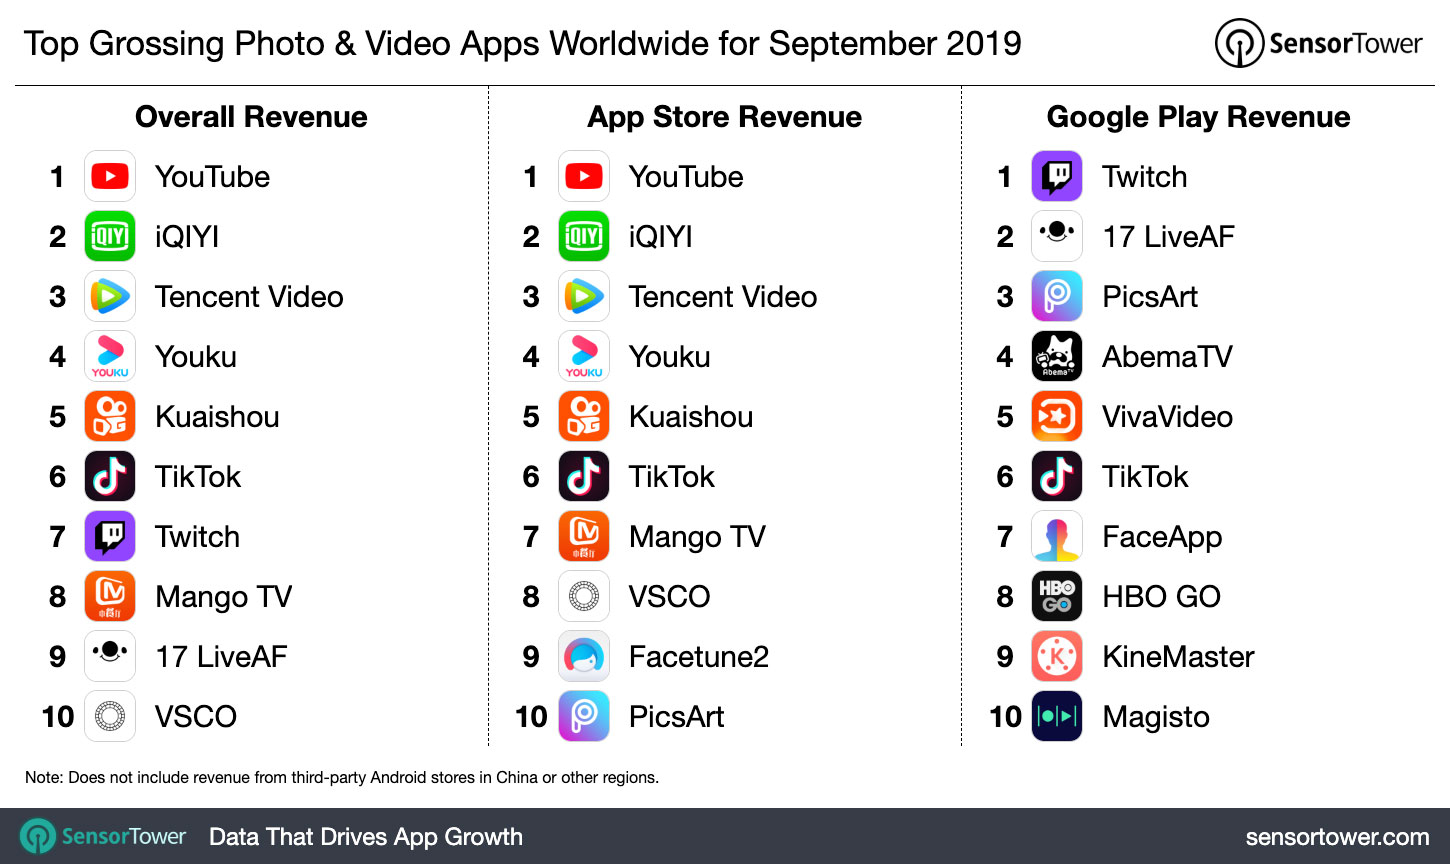 top-grossing-photo-and-video-apps-worldwide-september-2019.jpg